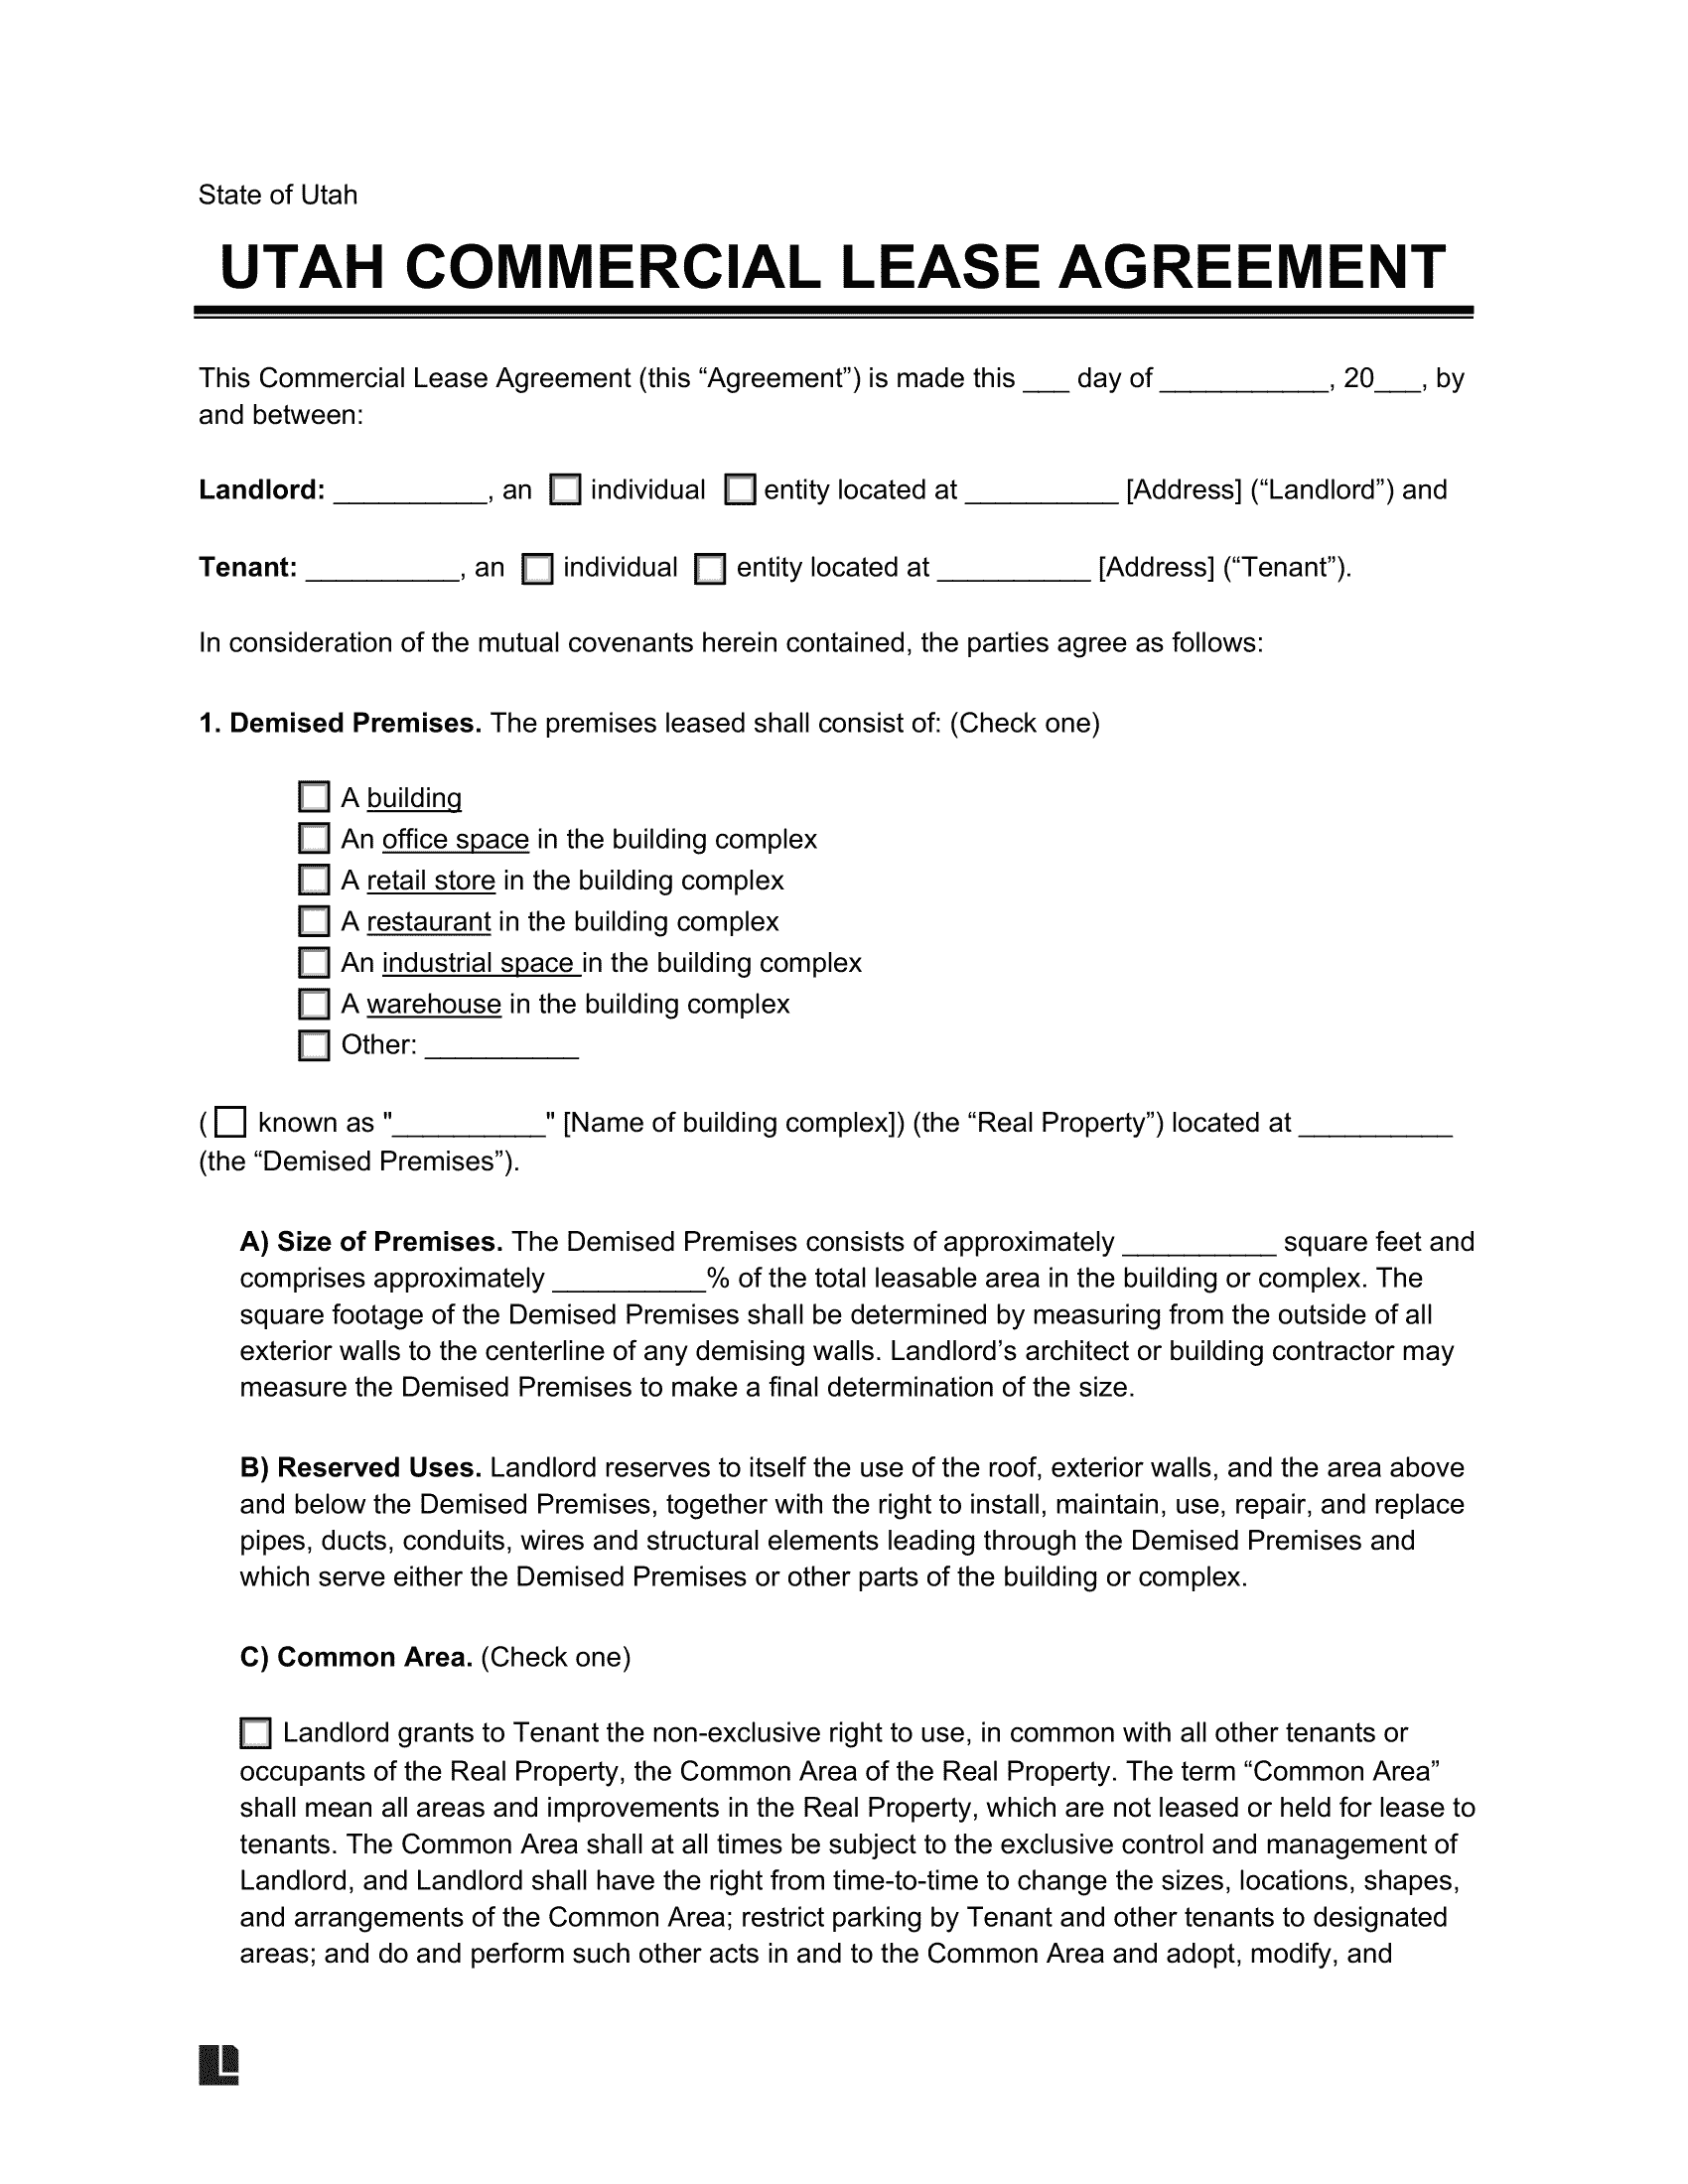 Utah Commercial Lease Agreement Template